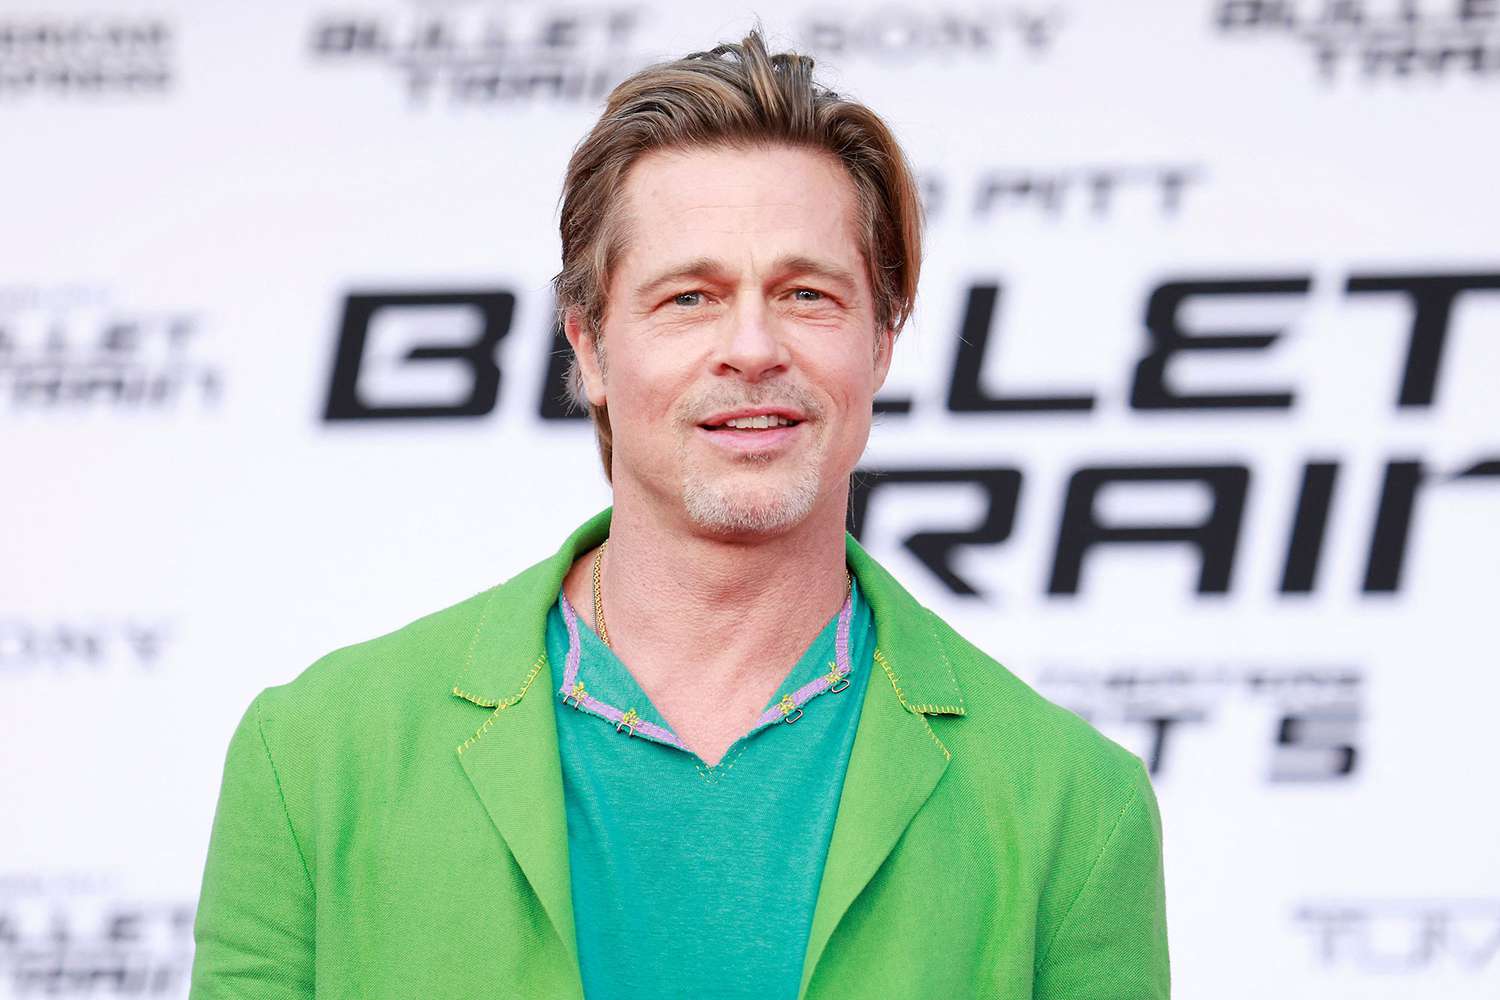 Brad Pitt attends the Los Angeles premiere of "Bullet Train" at the Regency Village theatre in Westwood, California, August 1, 2022.